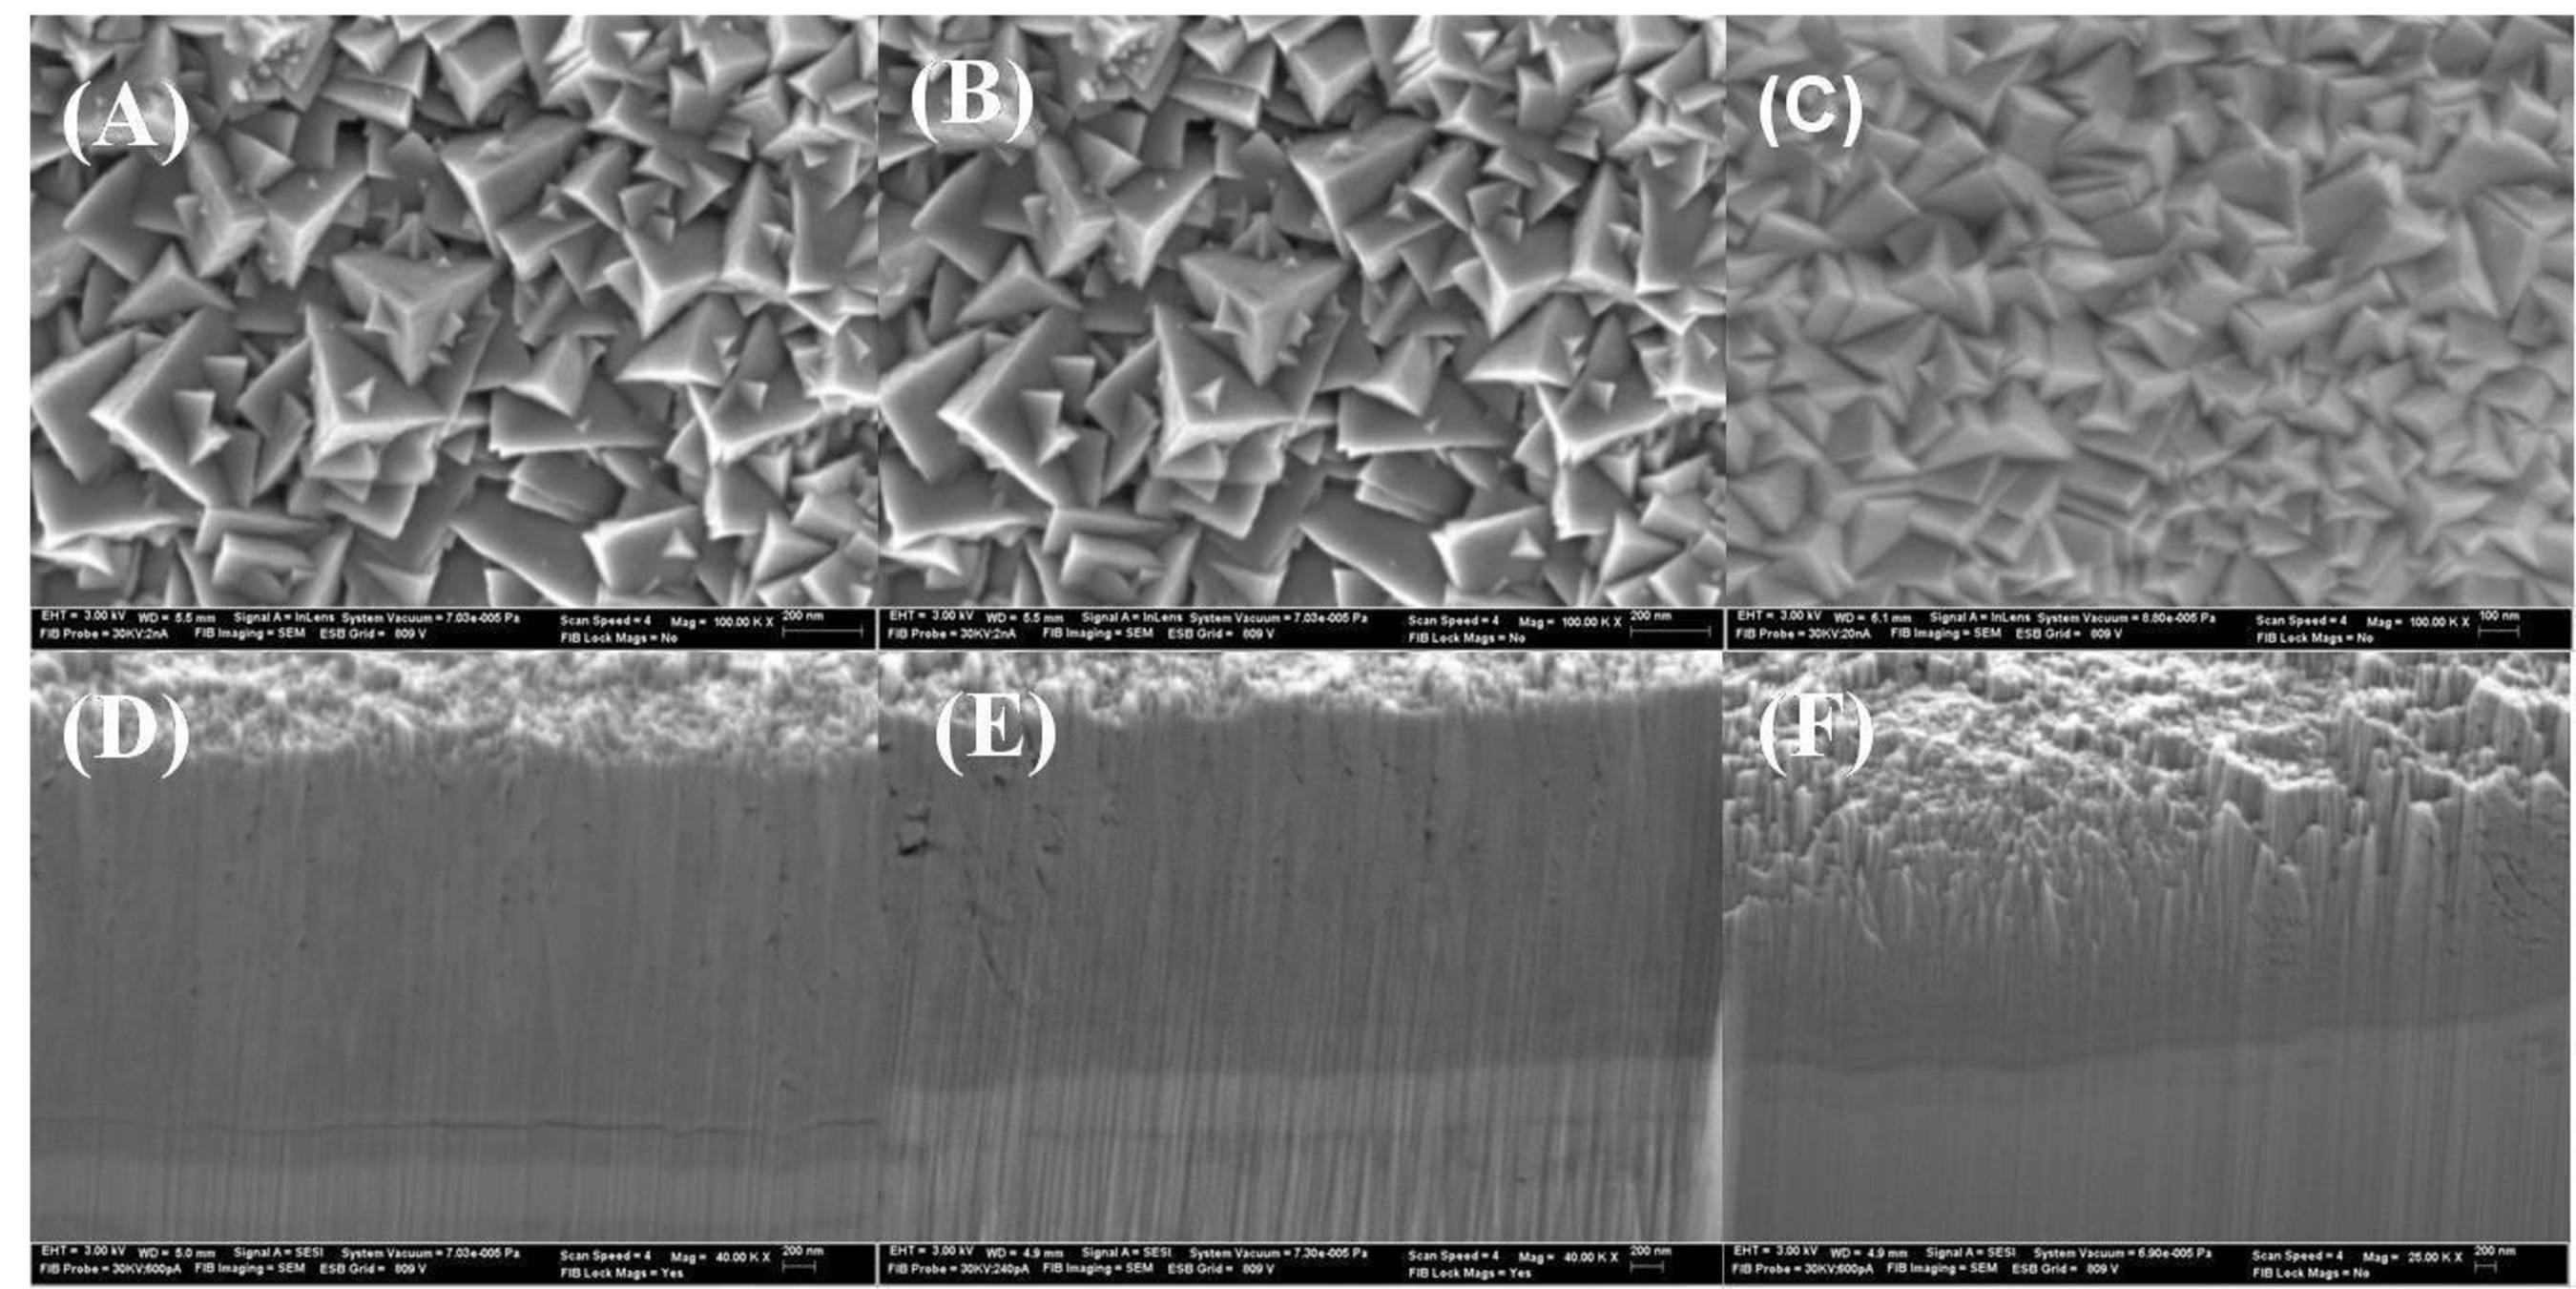 Figure 1. Focused Ion Beam micrograph- plan-view (top) and cross-section (bottom) of fractal TiN films deposited at (A & D) 25 o C; (B & E) 80 o C; and (C & F) 130 o C.  (PRNewsFoto/Denton Vacuum LLC)